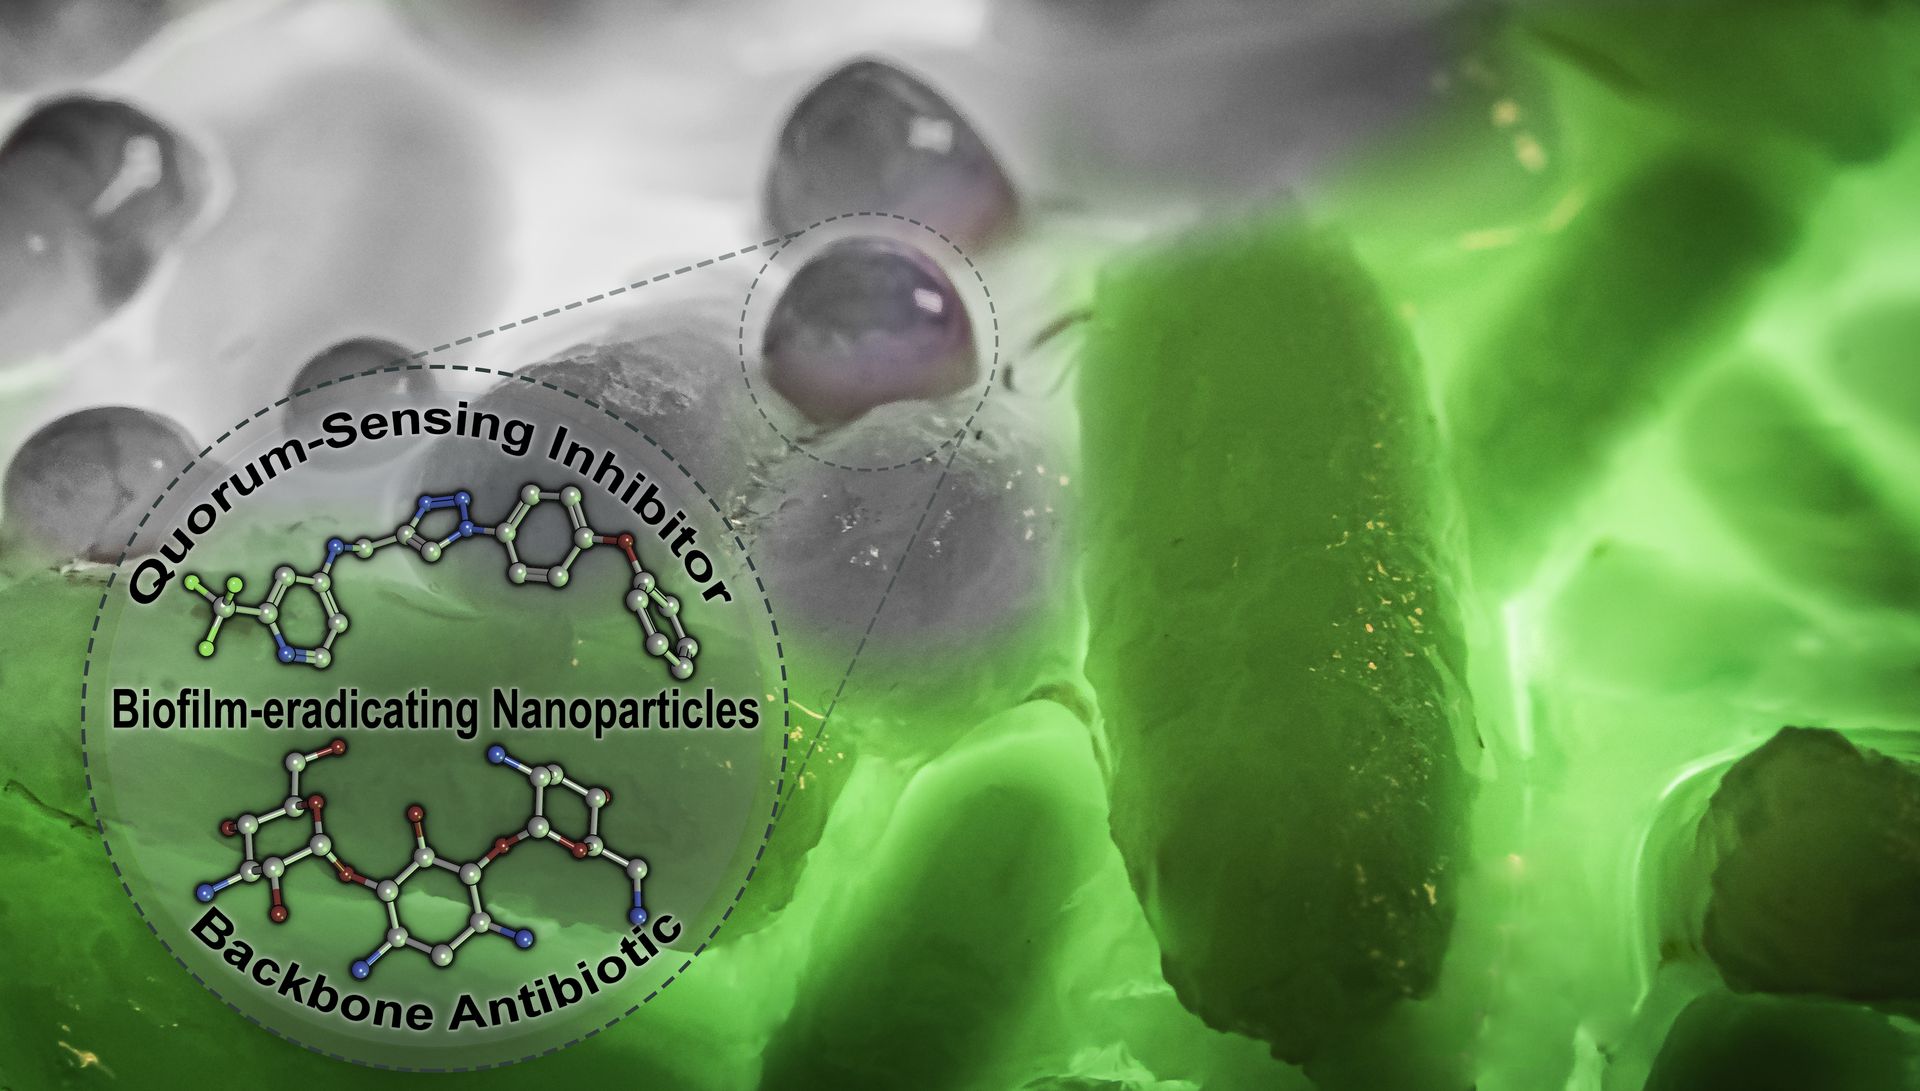 Dual-loaded nanoparticles carrying a quorum sensing inhibitor (QSI) and standard-of-care antibiotic tobramycin eradicate Pseudomonas aeruginosa biofilms. The QSI specifically disrupts the regulation of pathogenicity-determining traits and thereby potentiates antibiotic efficiency against this otherwise recalcitrant bacterium.